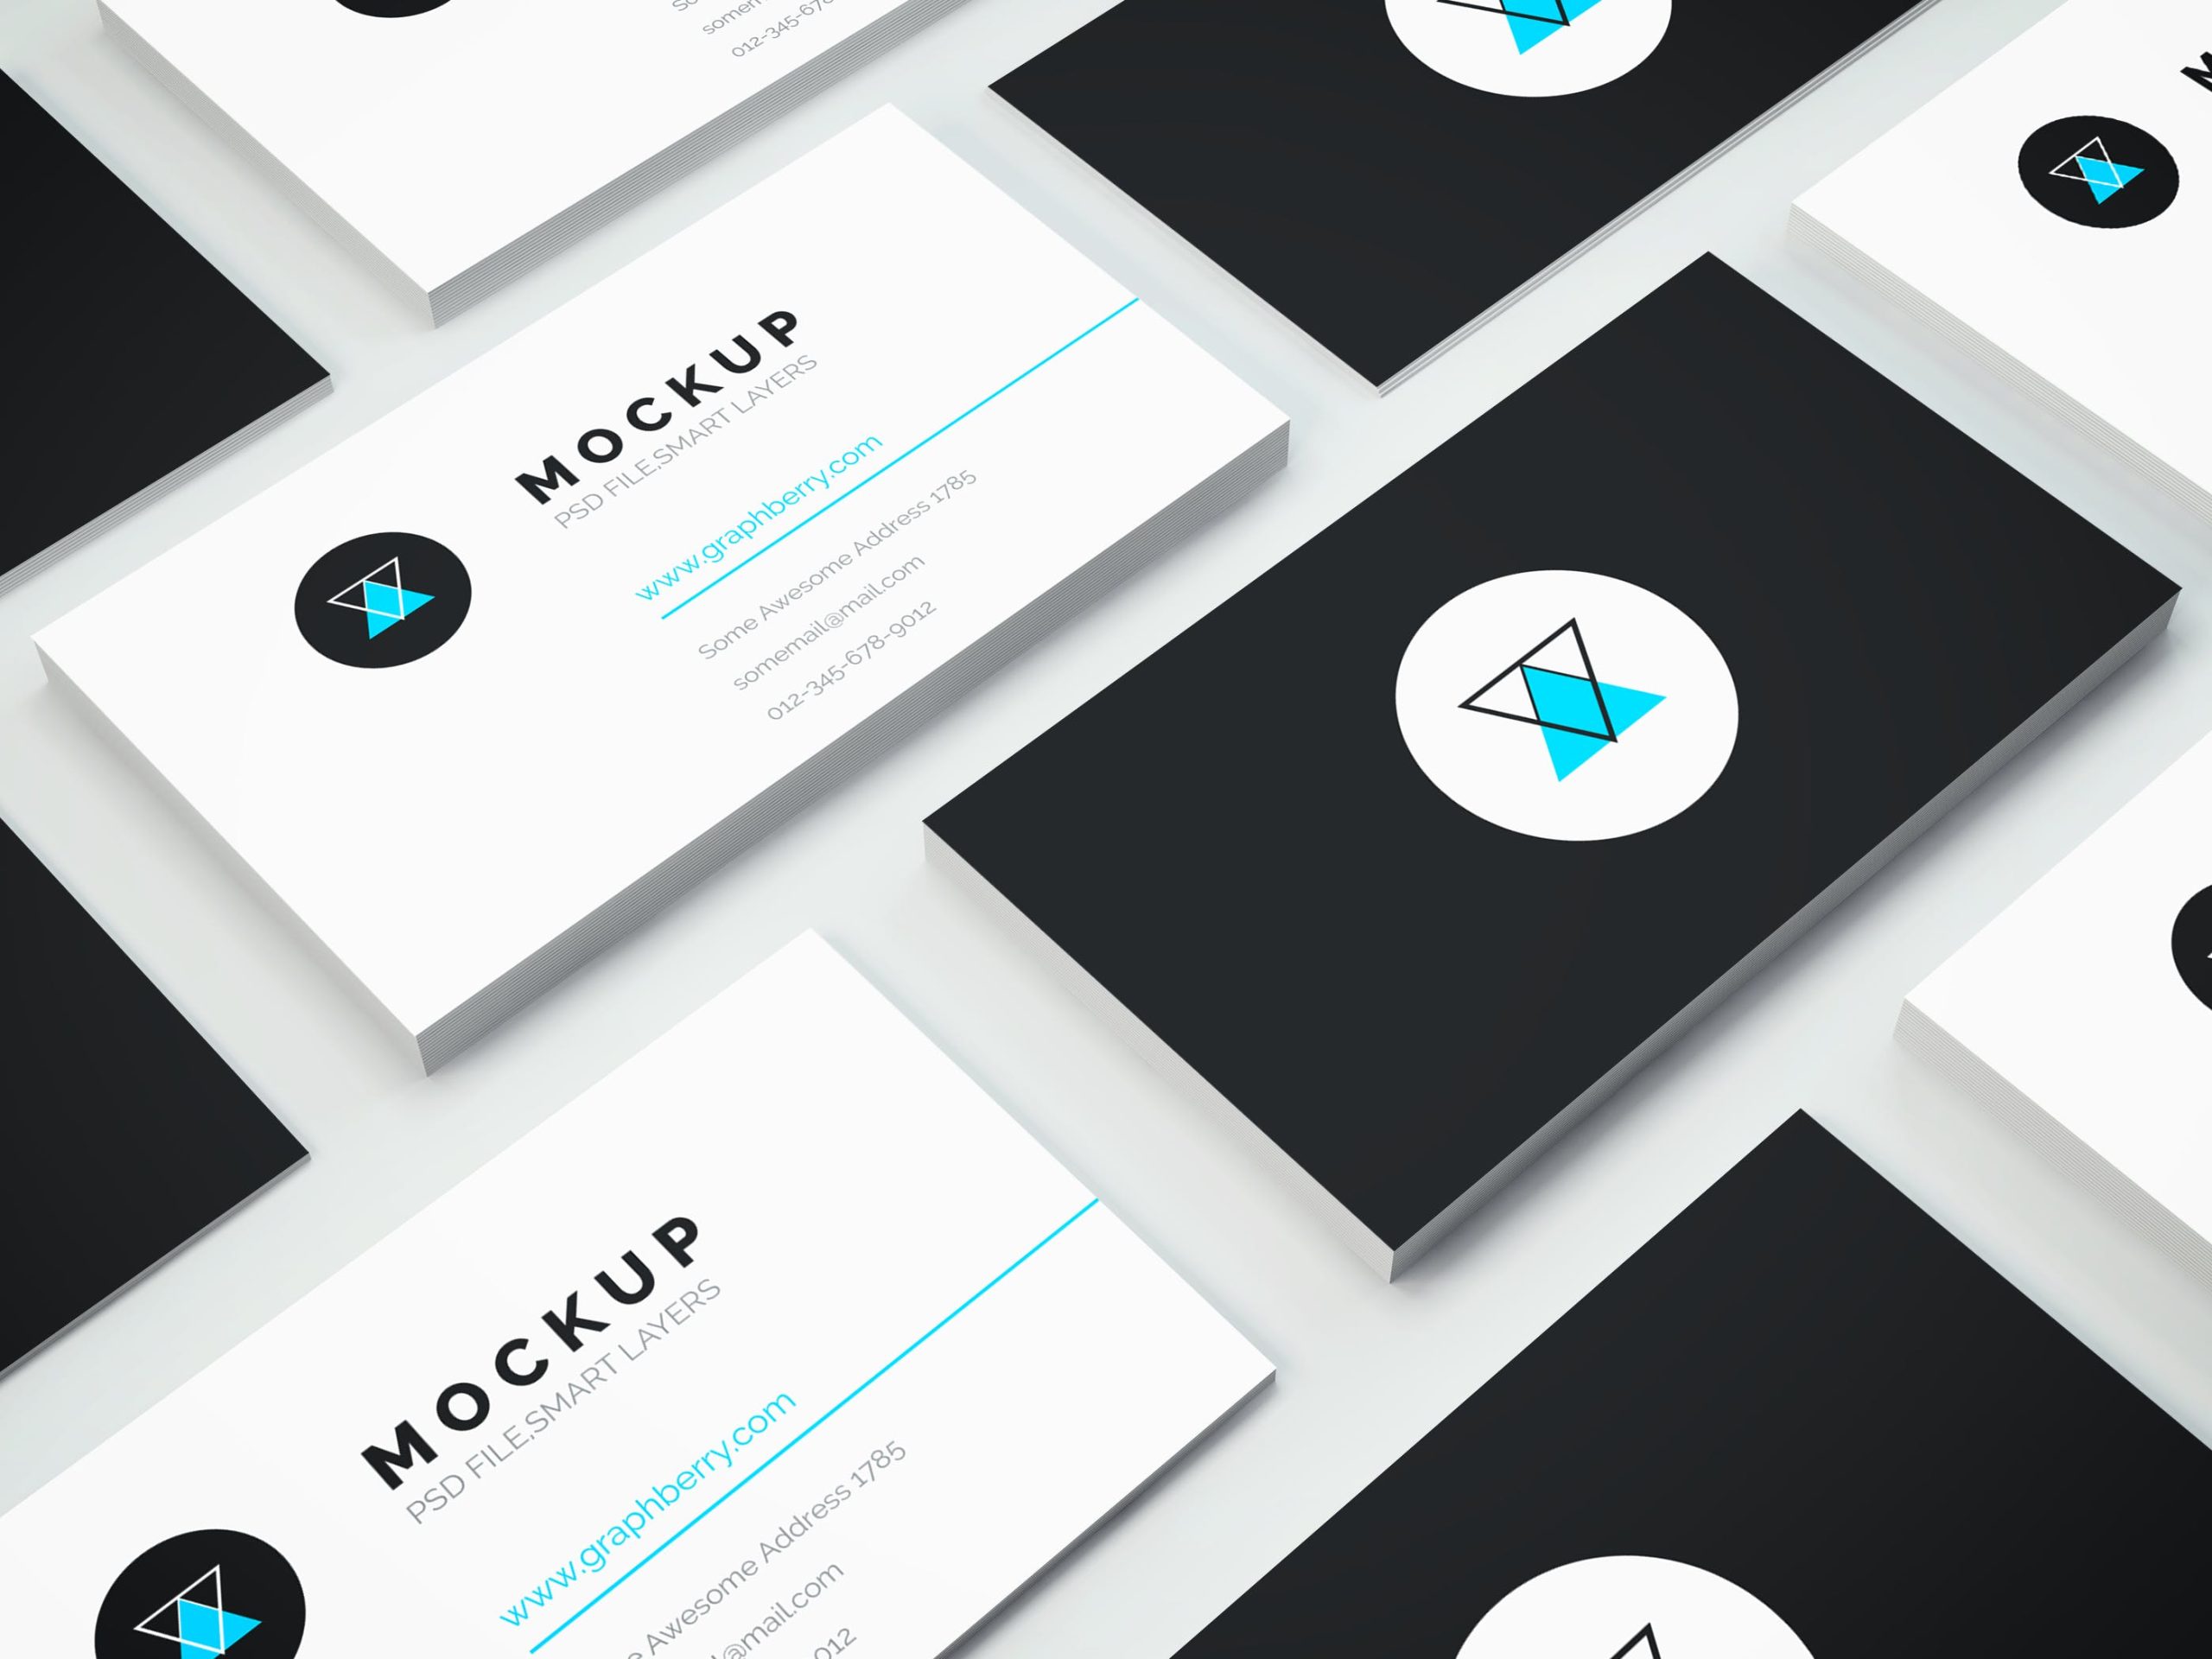 View Mockup Psd Business Card Images